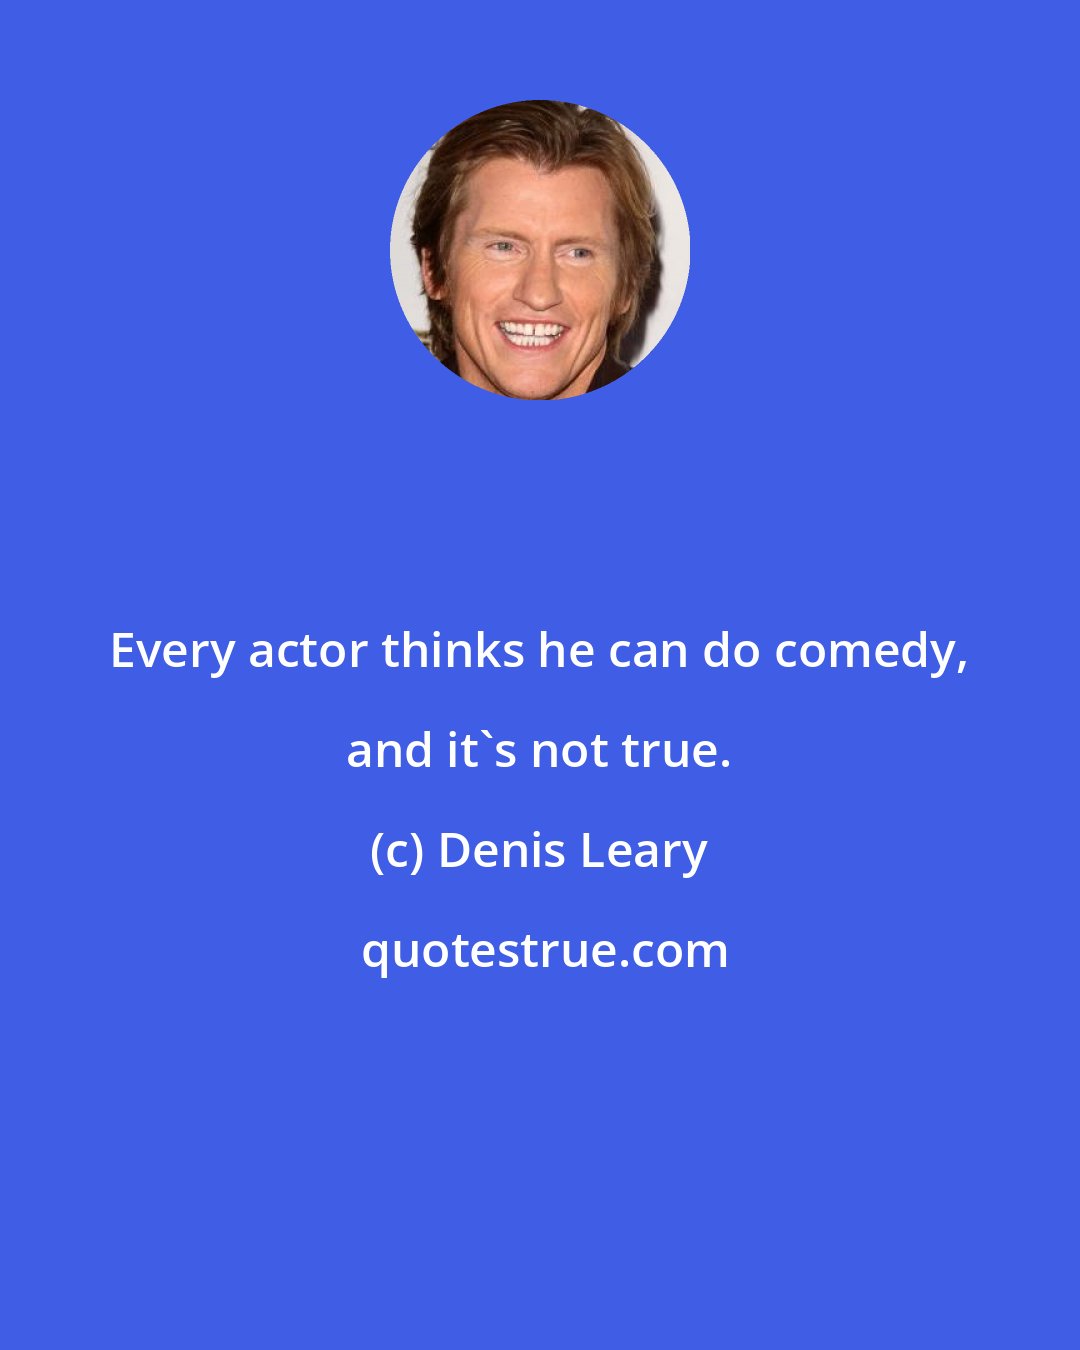 Denis Leary: Every actor thinks he can do comedy, and it's not true.